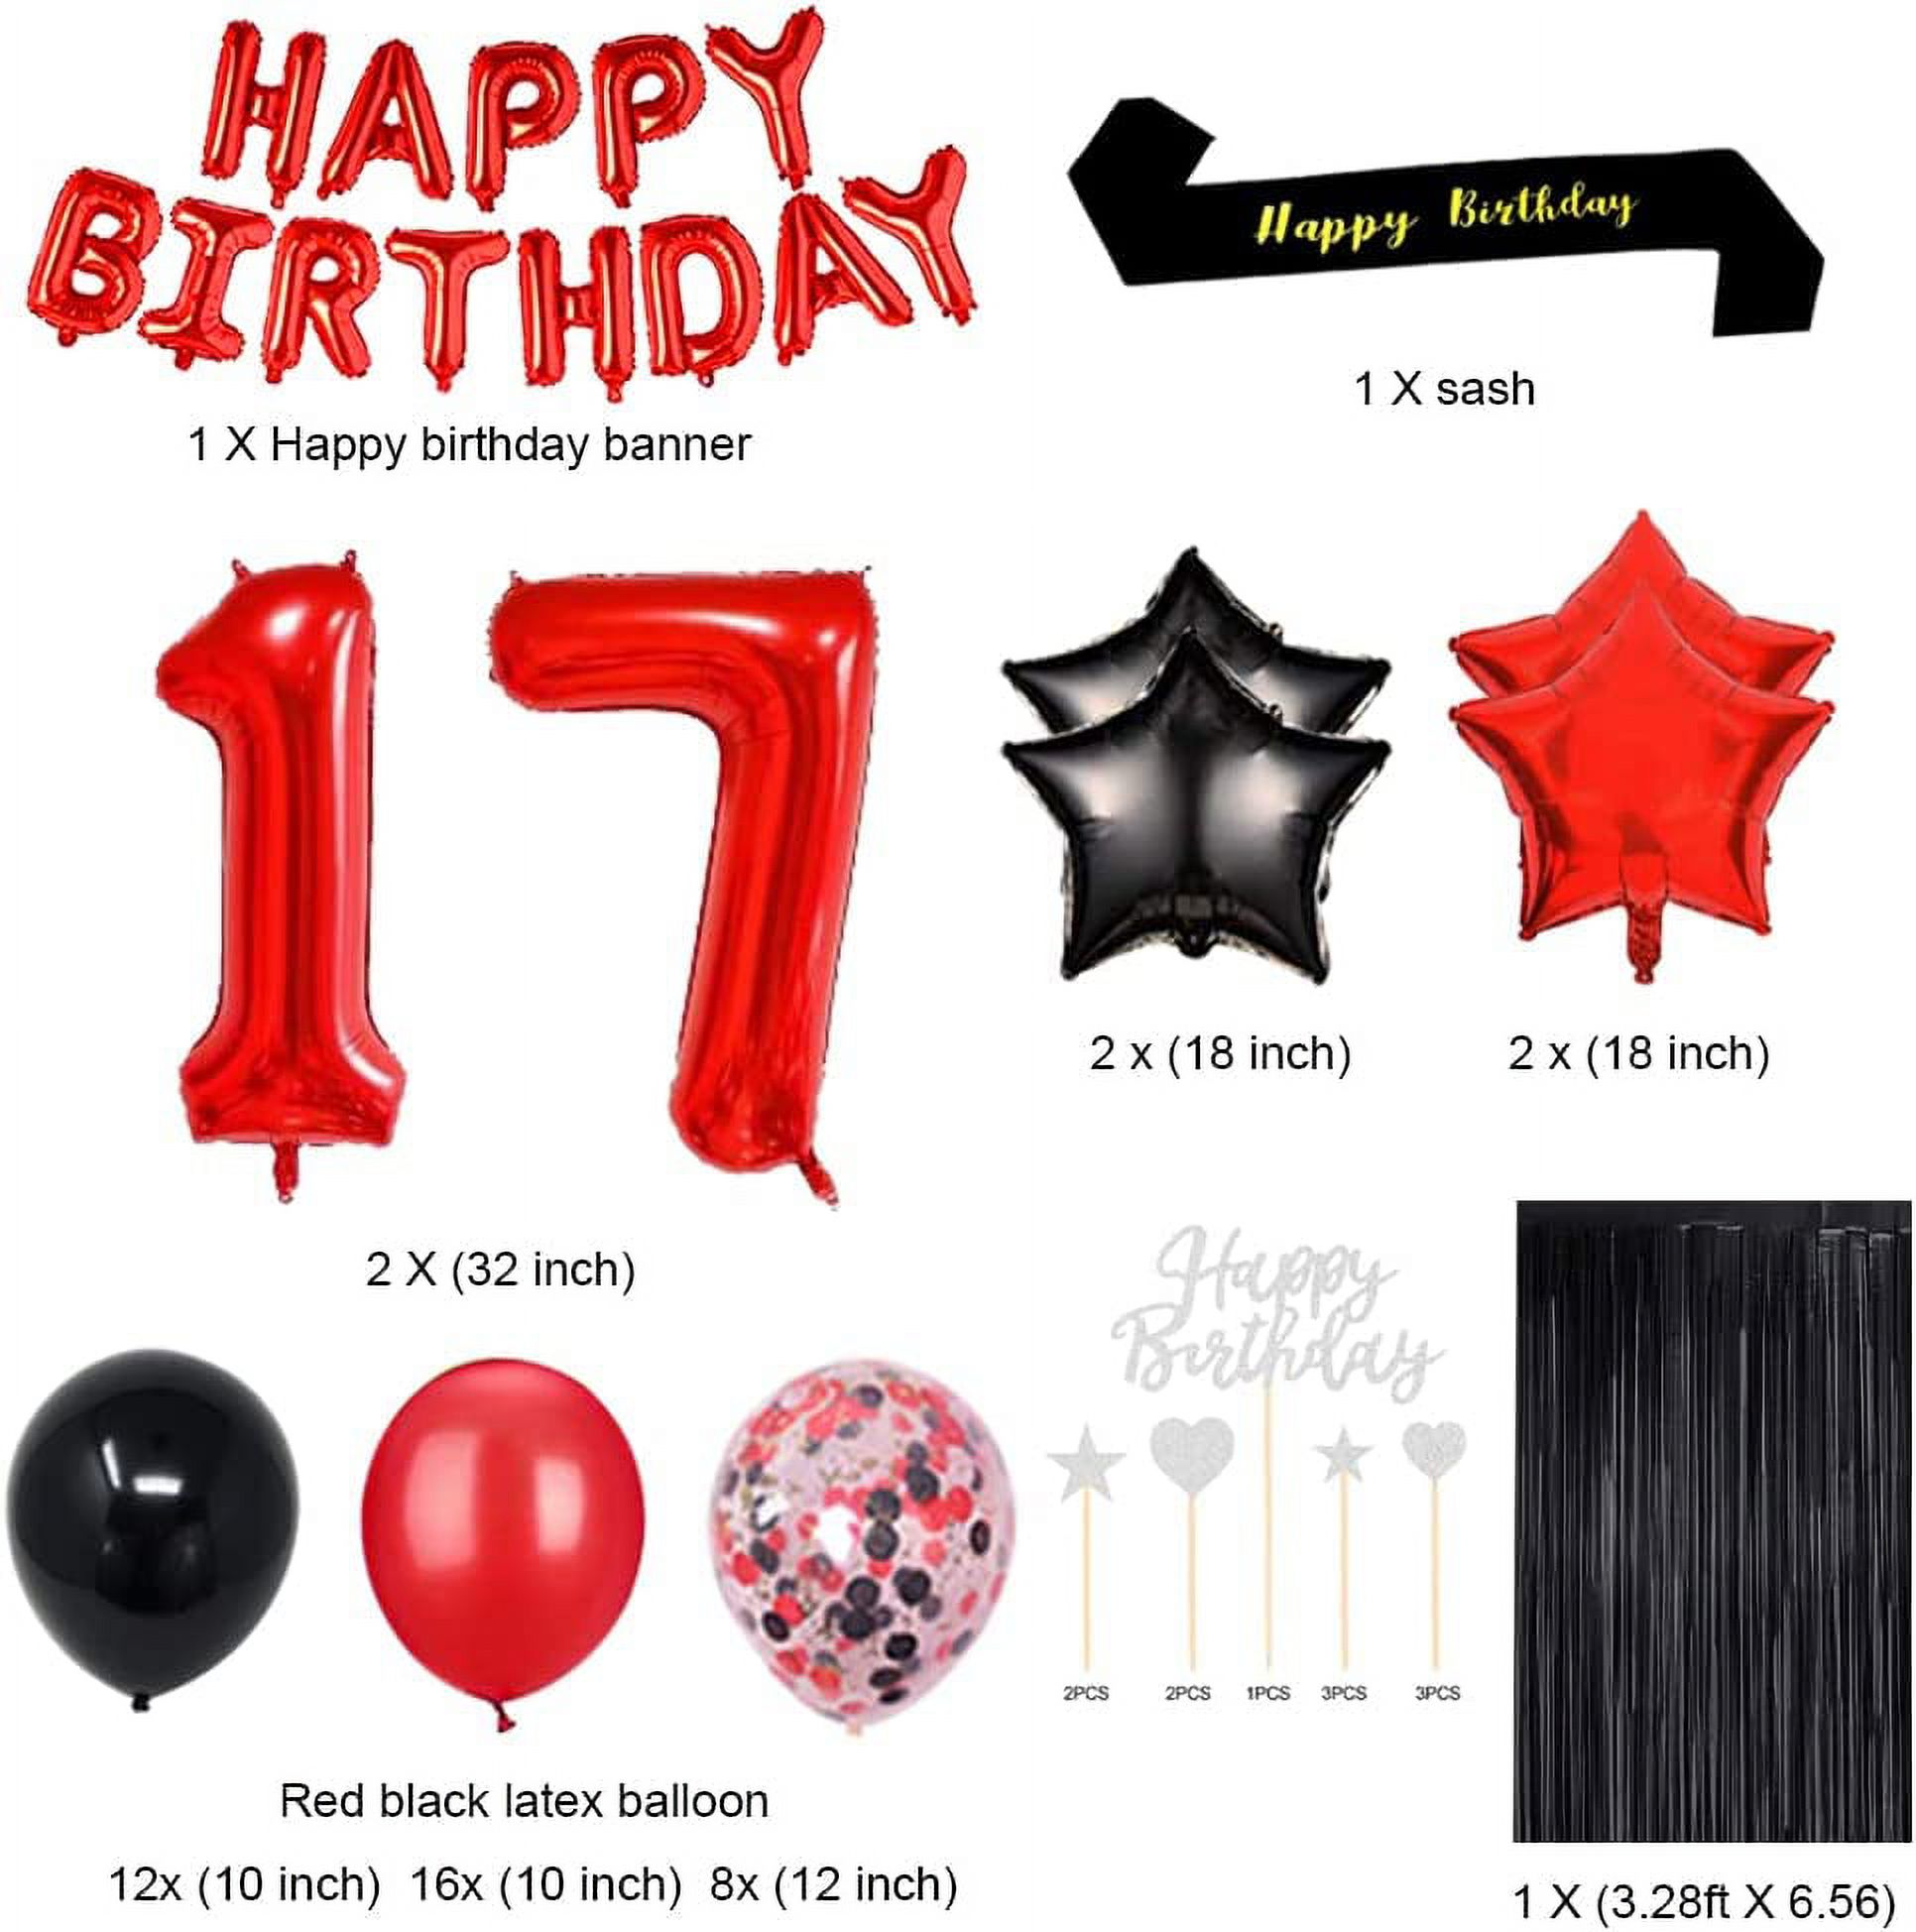 Fancy 17TH Birthday Party Decorations Supplies Red Black Later